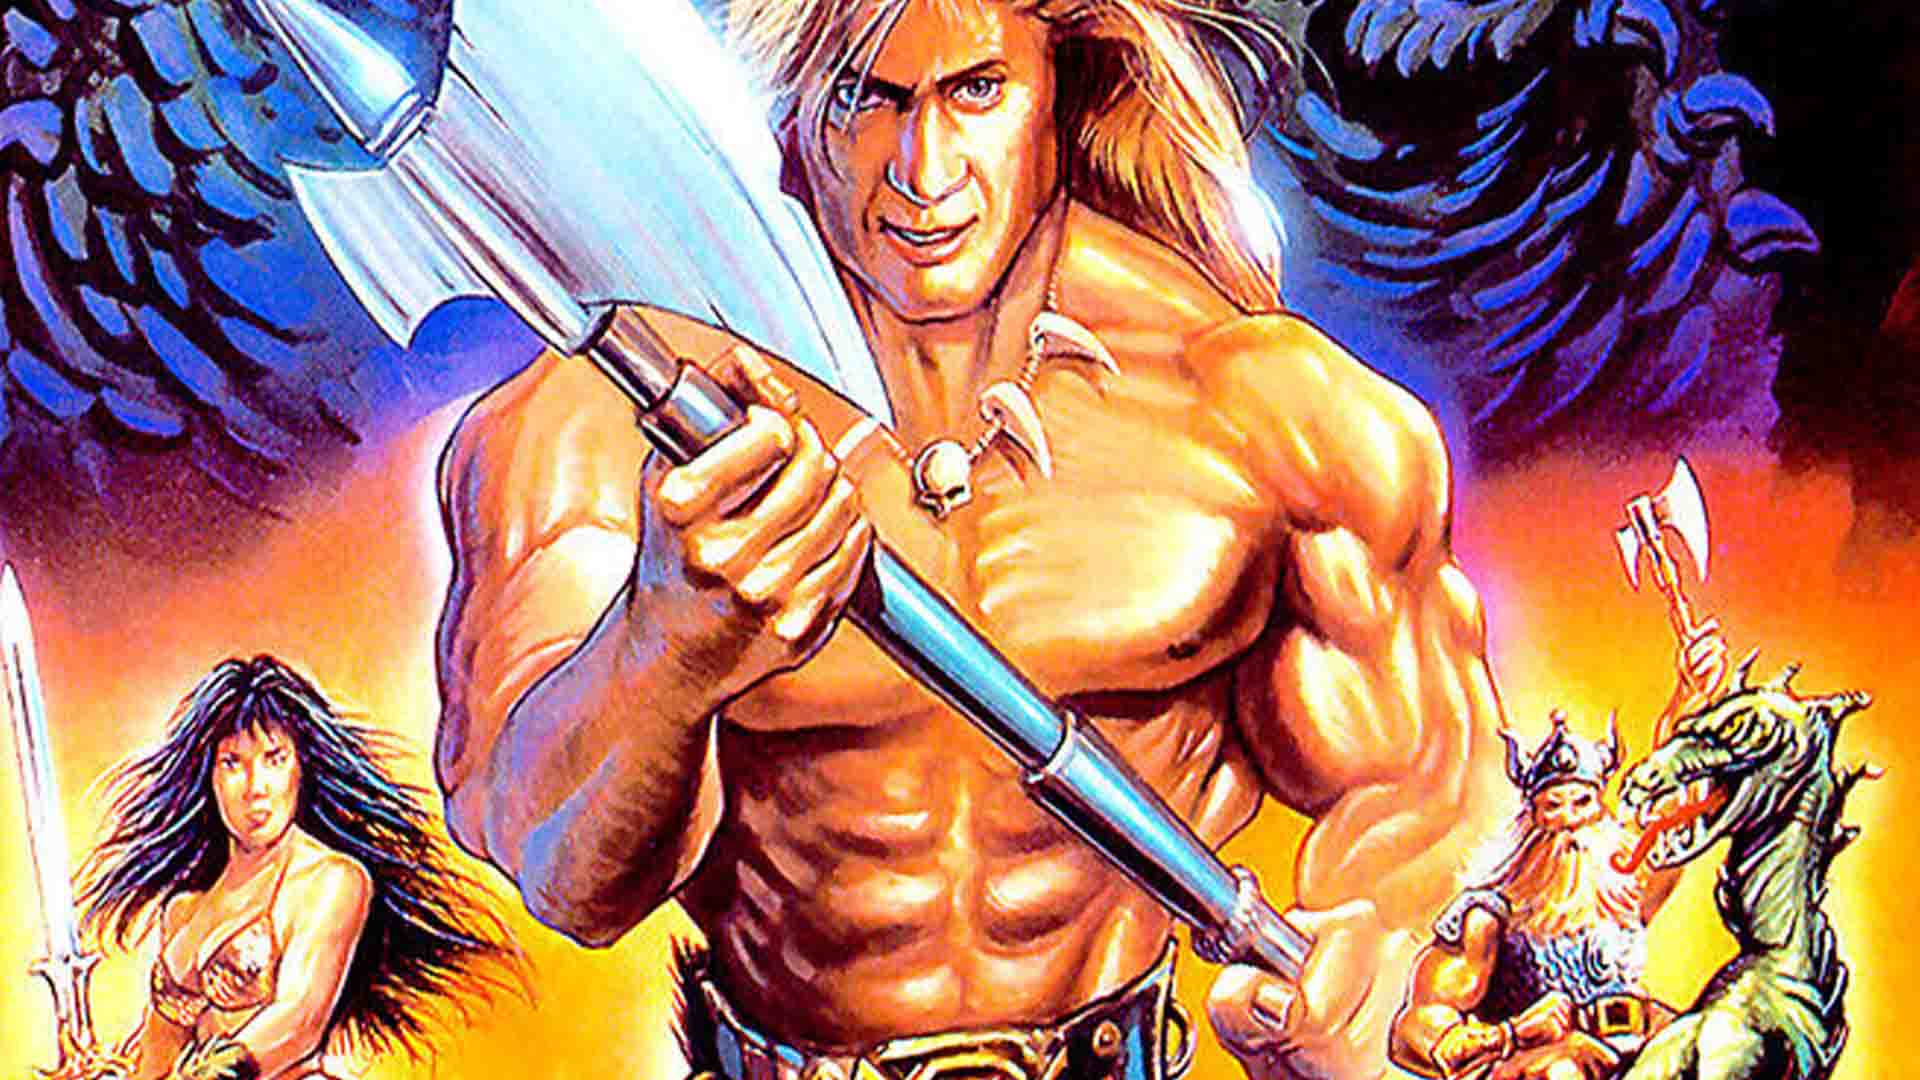 Golden Axe TV show commissioned by Comedy Central